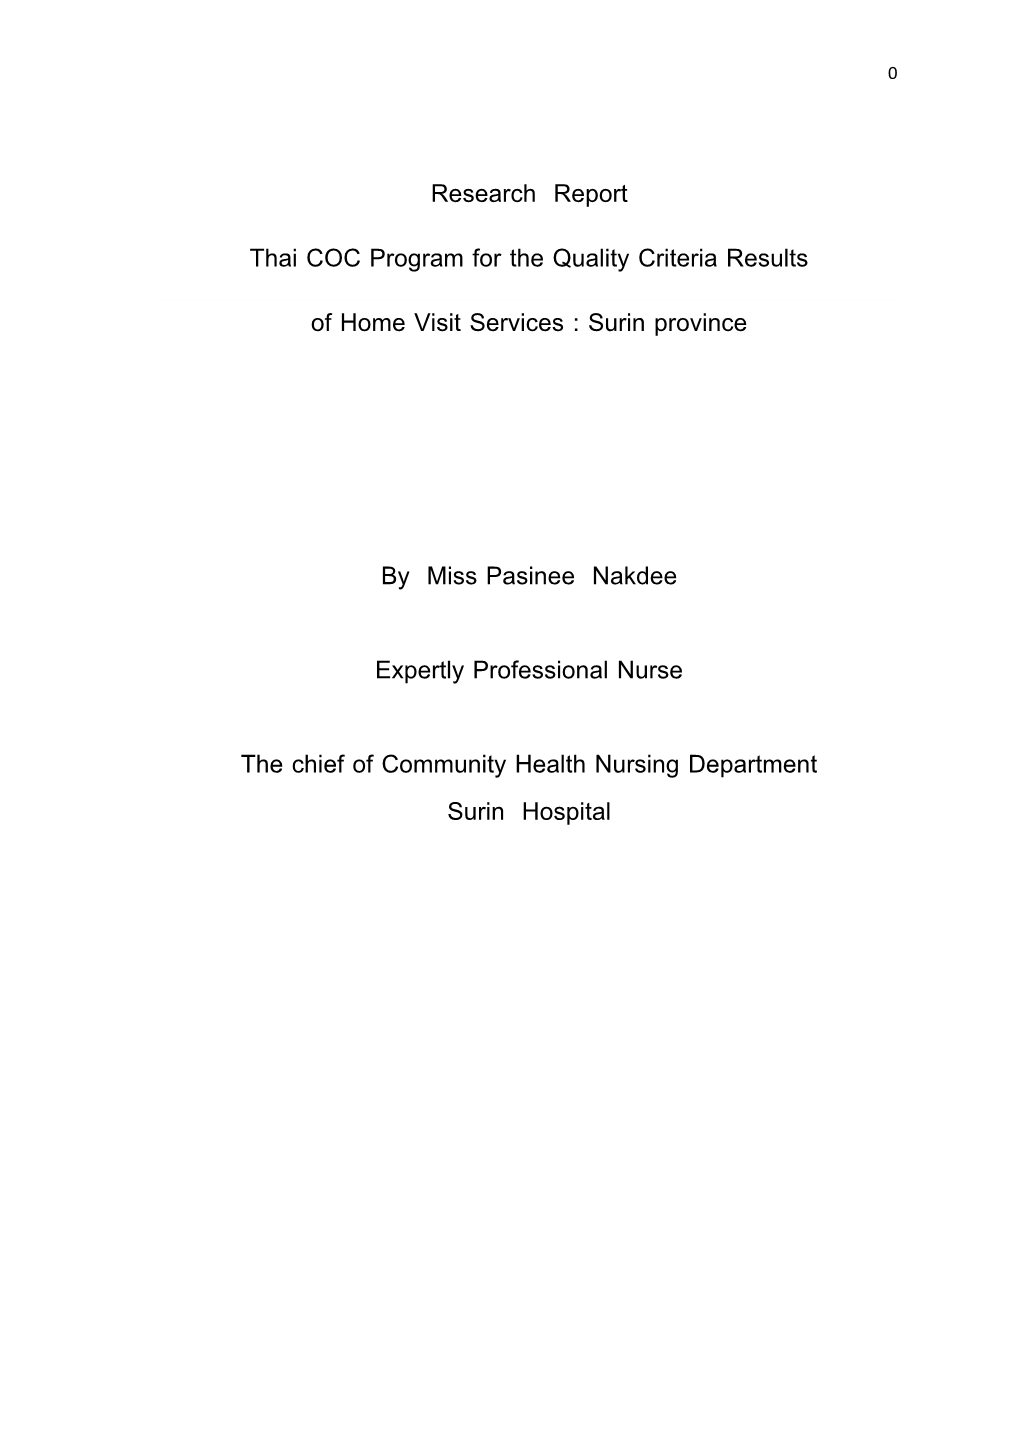 Research Report Thai COC Program for the Quality Criteria Results of Home Visit Services : Surin Province